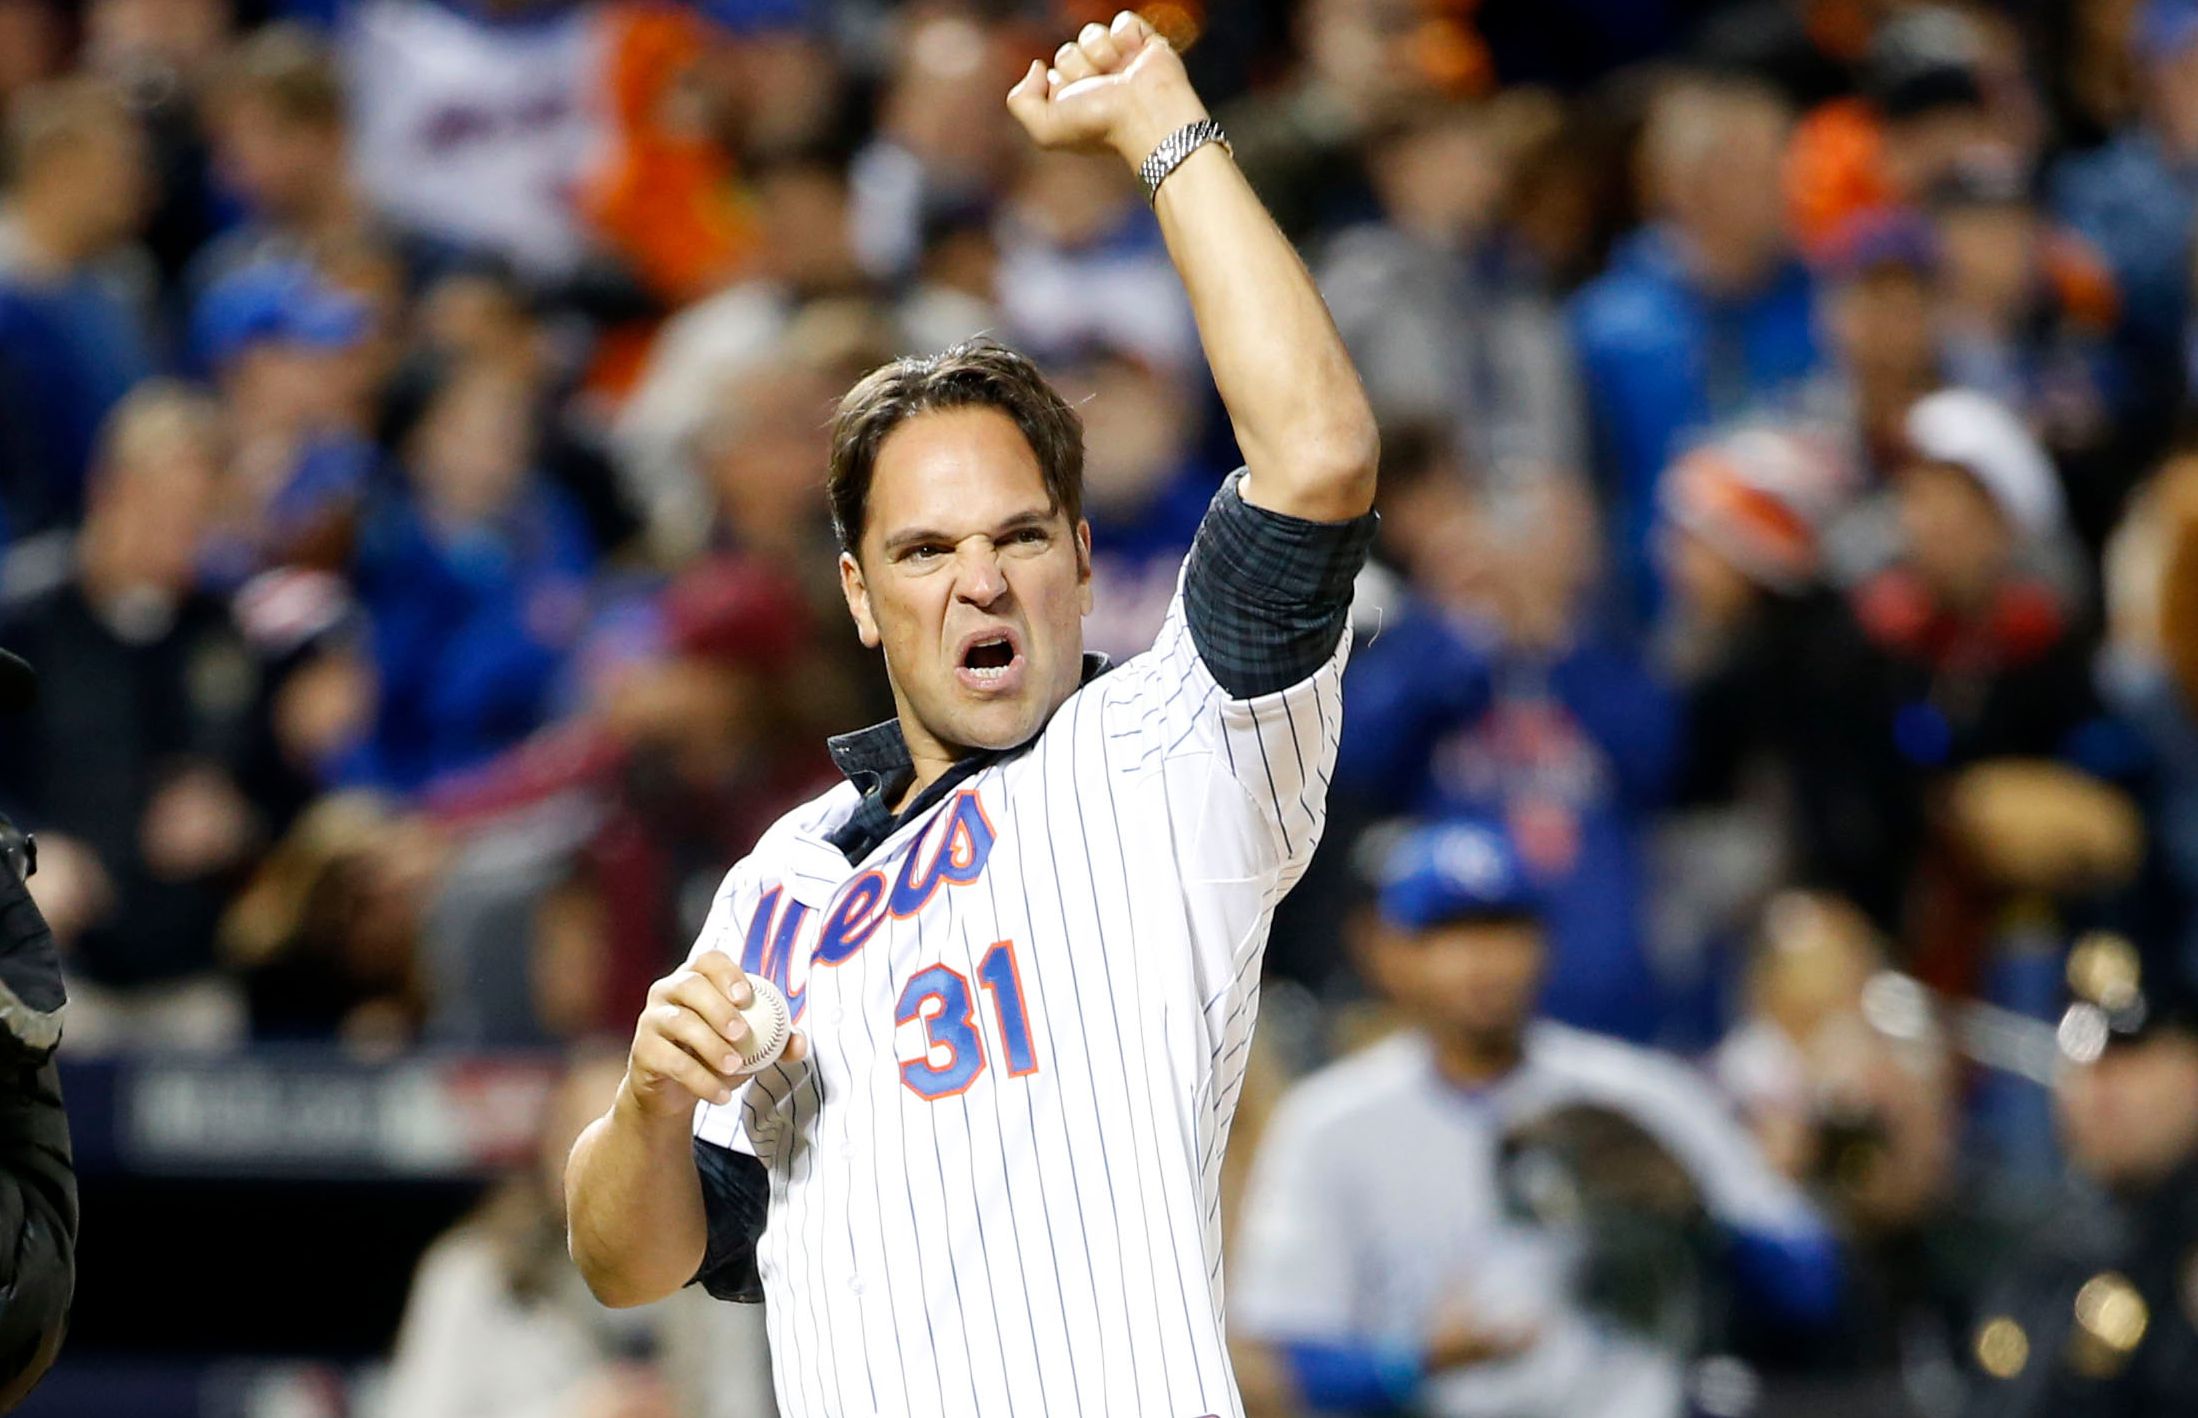 The Mets Welcome Mike Piazza Home and Give His Jersey a Spot in History -  The New York Times